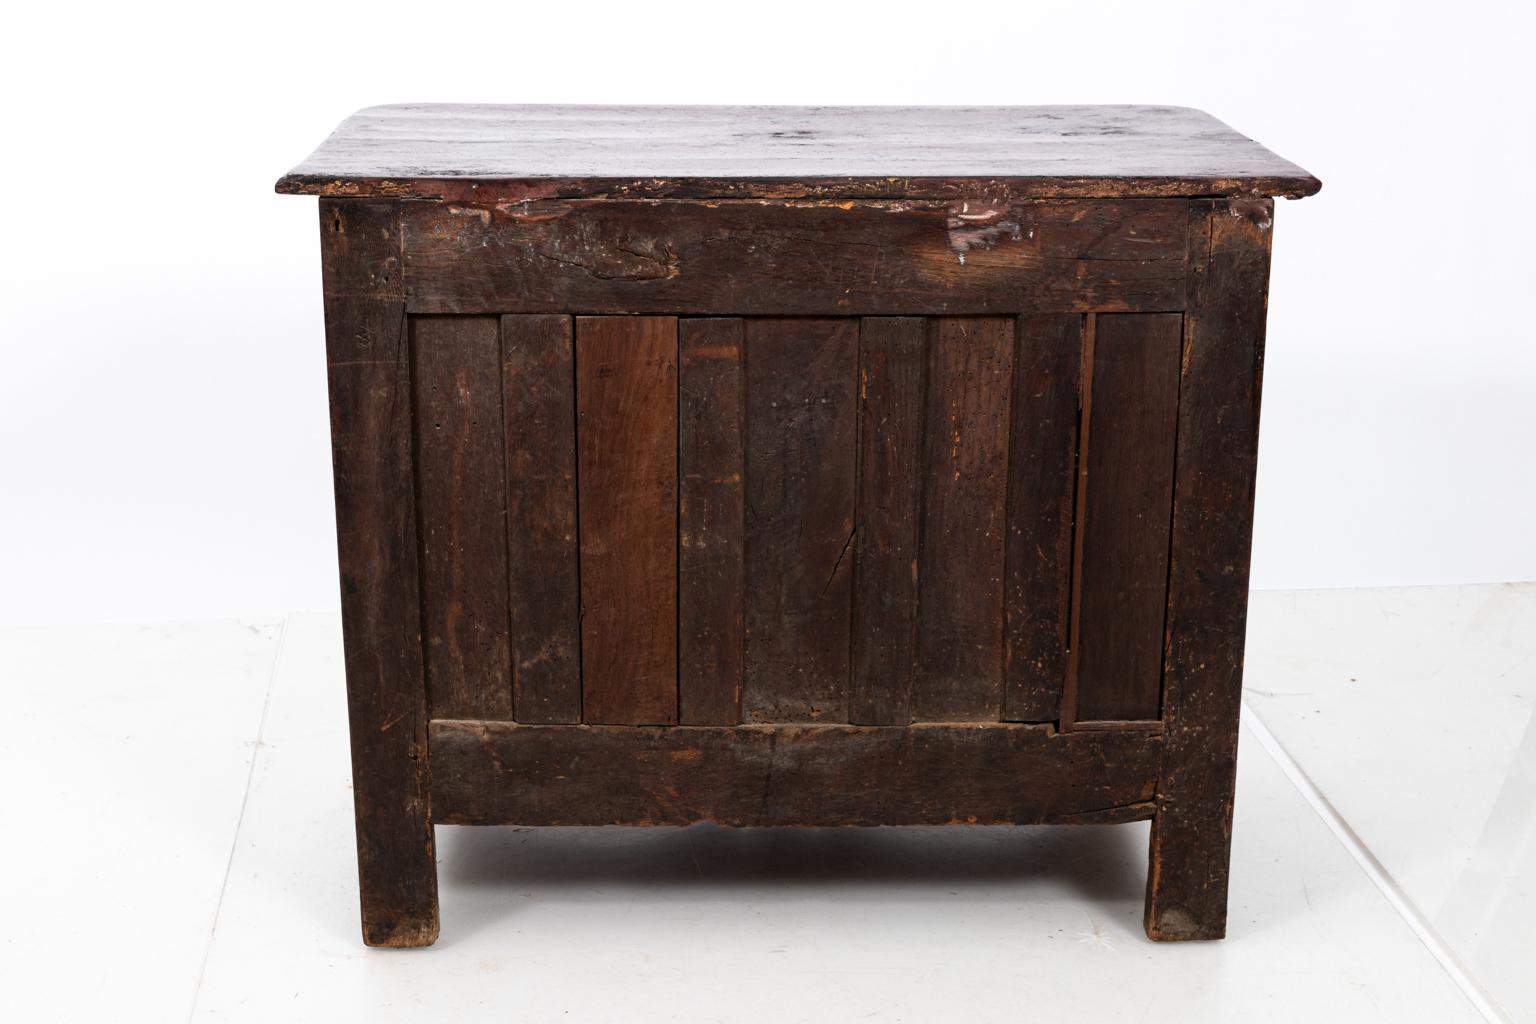 French walnut commode with four drawers, bronze hardware, and carved detail, circa 1830s. Please note of wear consistent with age including old repairs and discoloration.